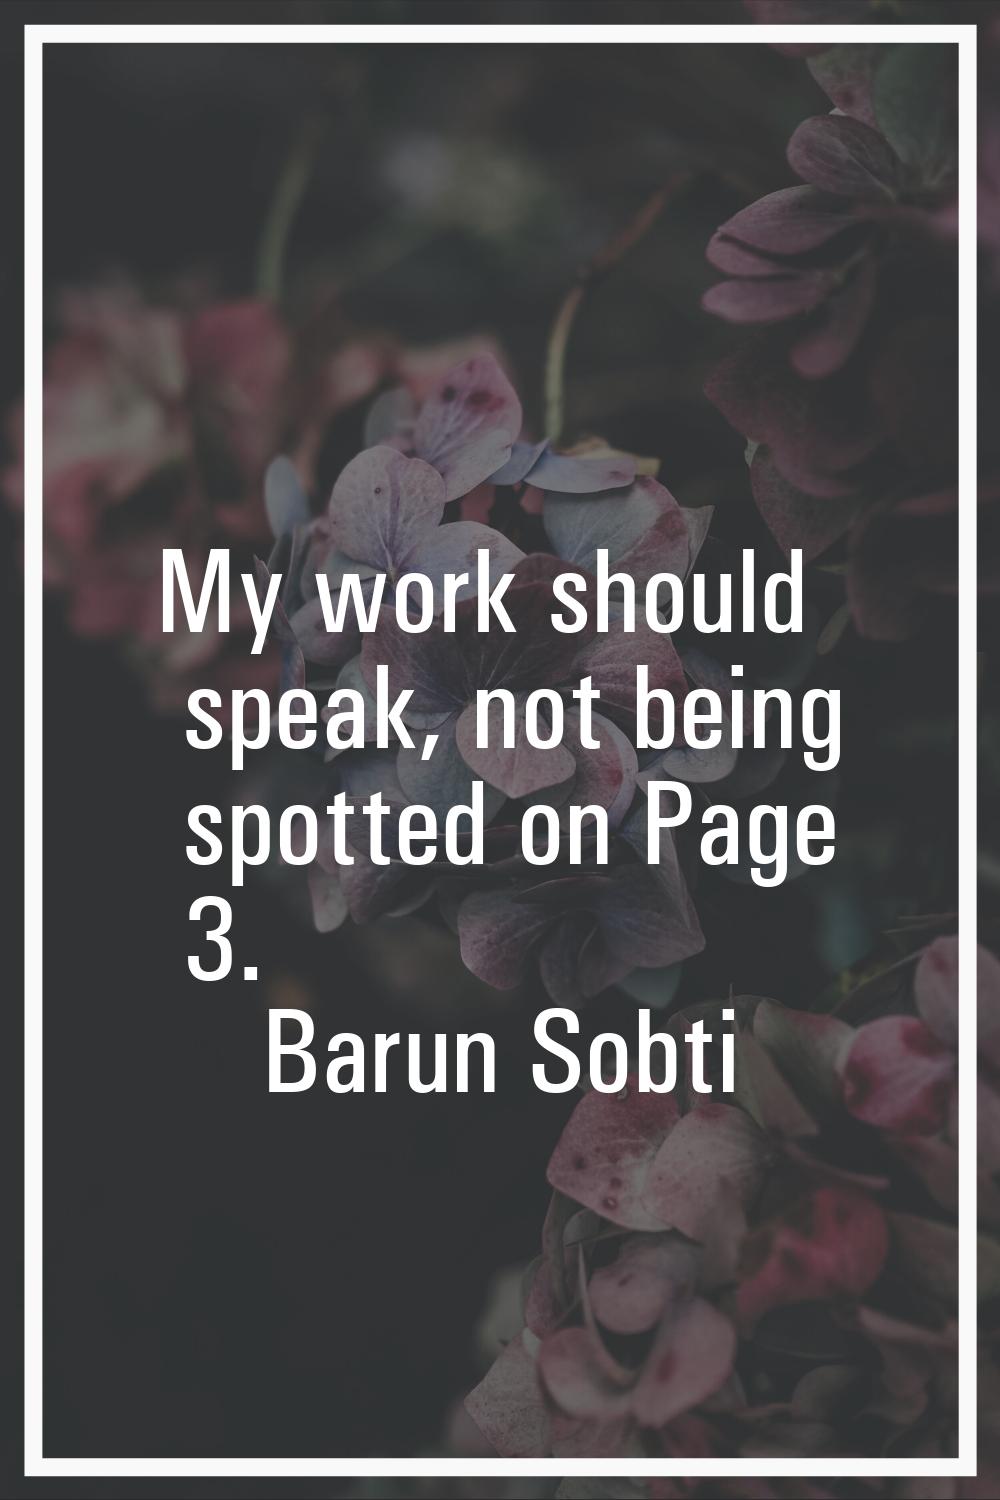 My work should speak, not being spotted on Page 3.